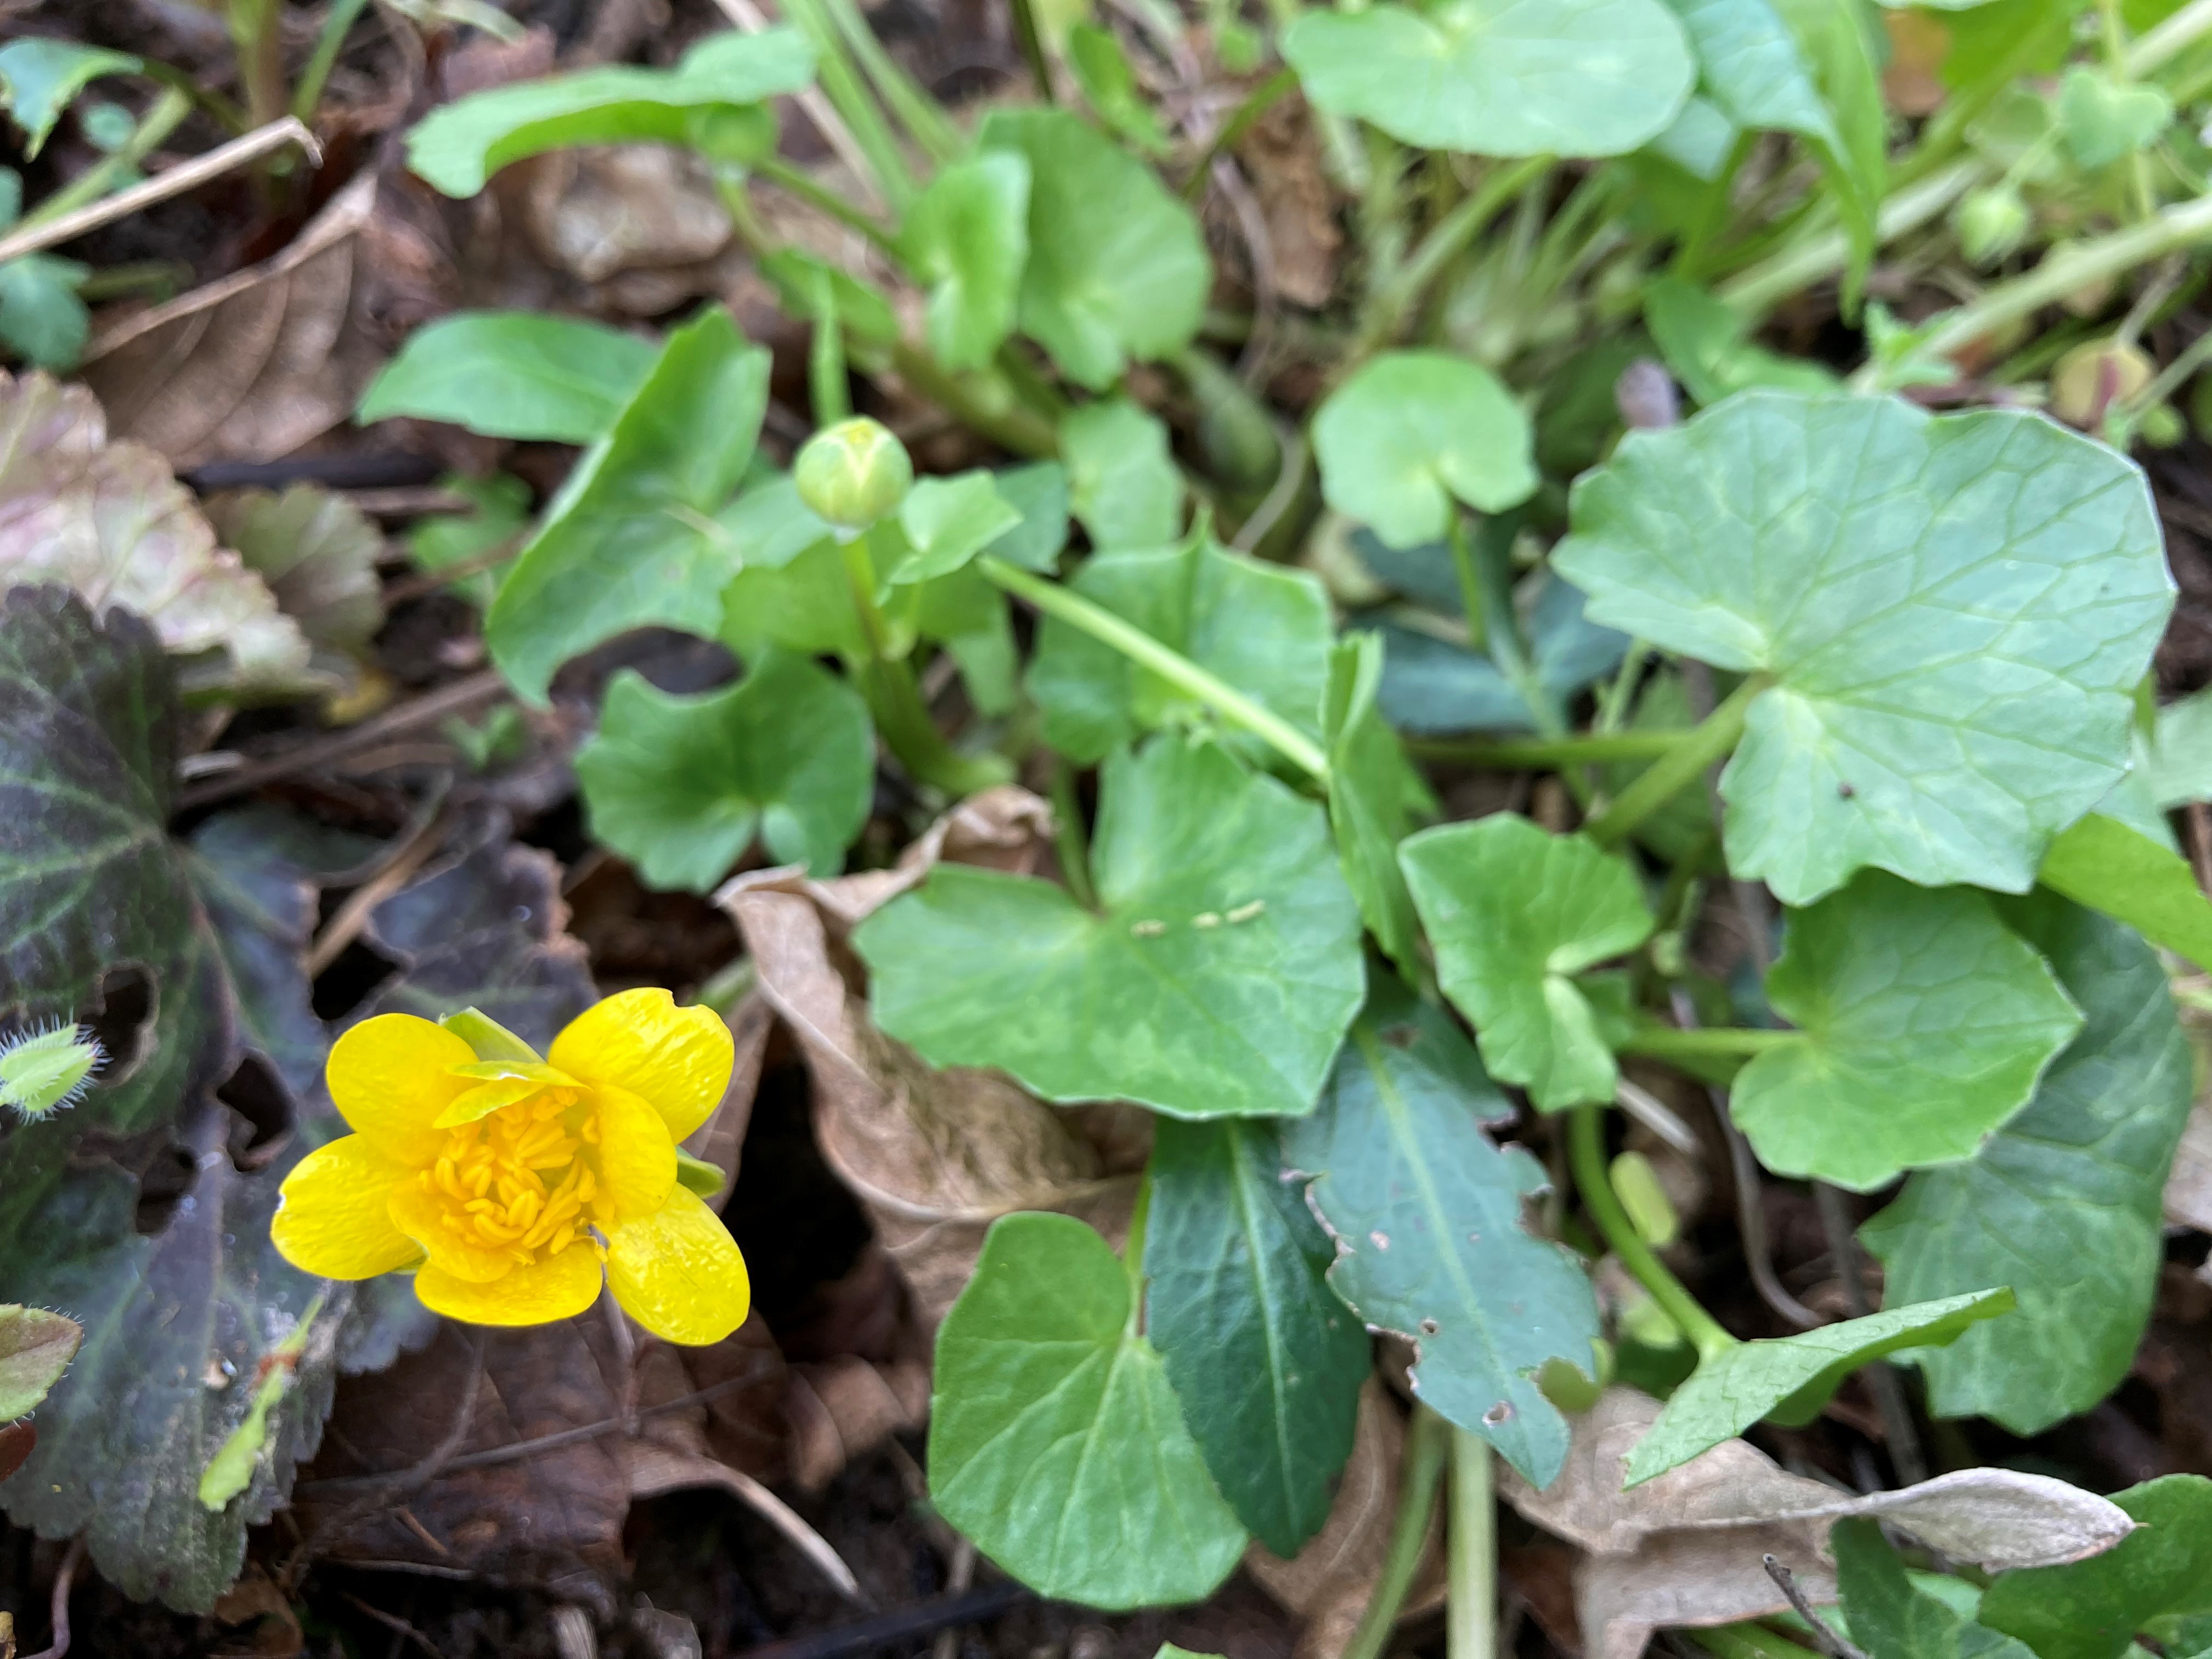 Lesser celandine may be a pretty sight in early spring, but it can take over an area rapidly, pushing out native wildflowers on which native fauna depend. Photo by Emily Ellingson.